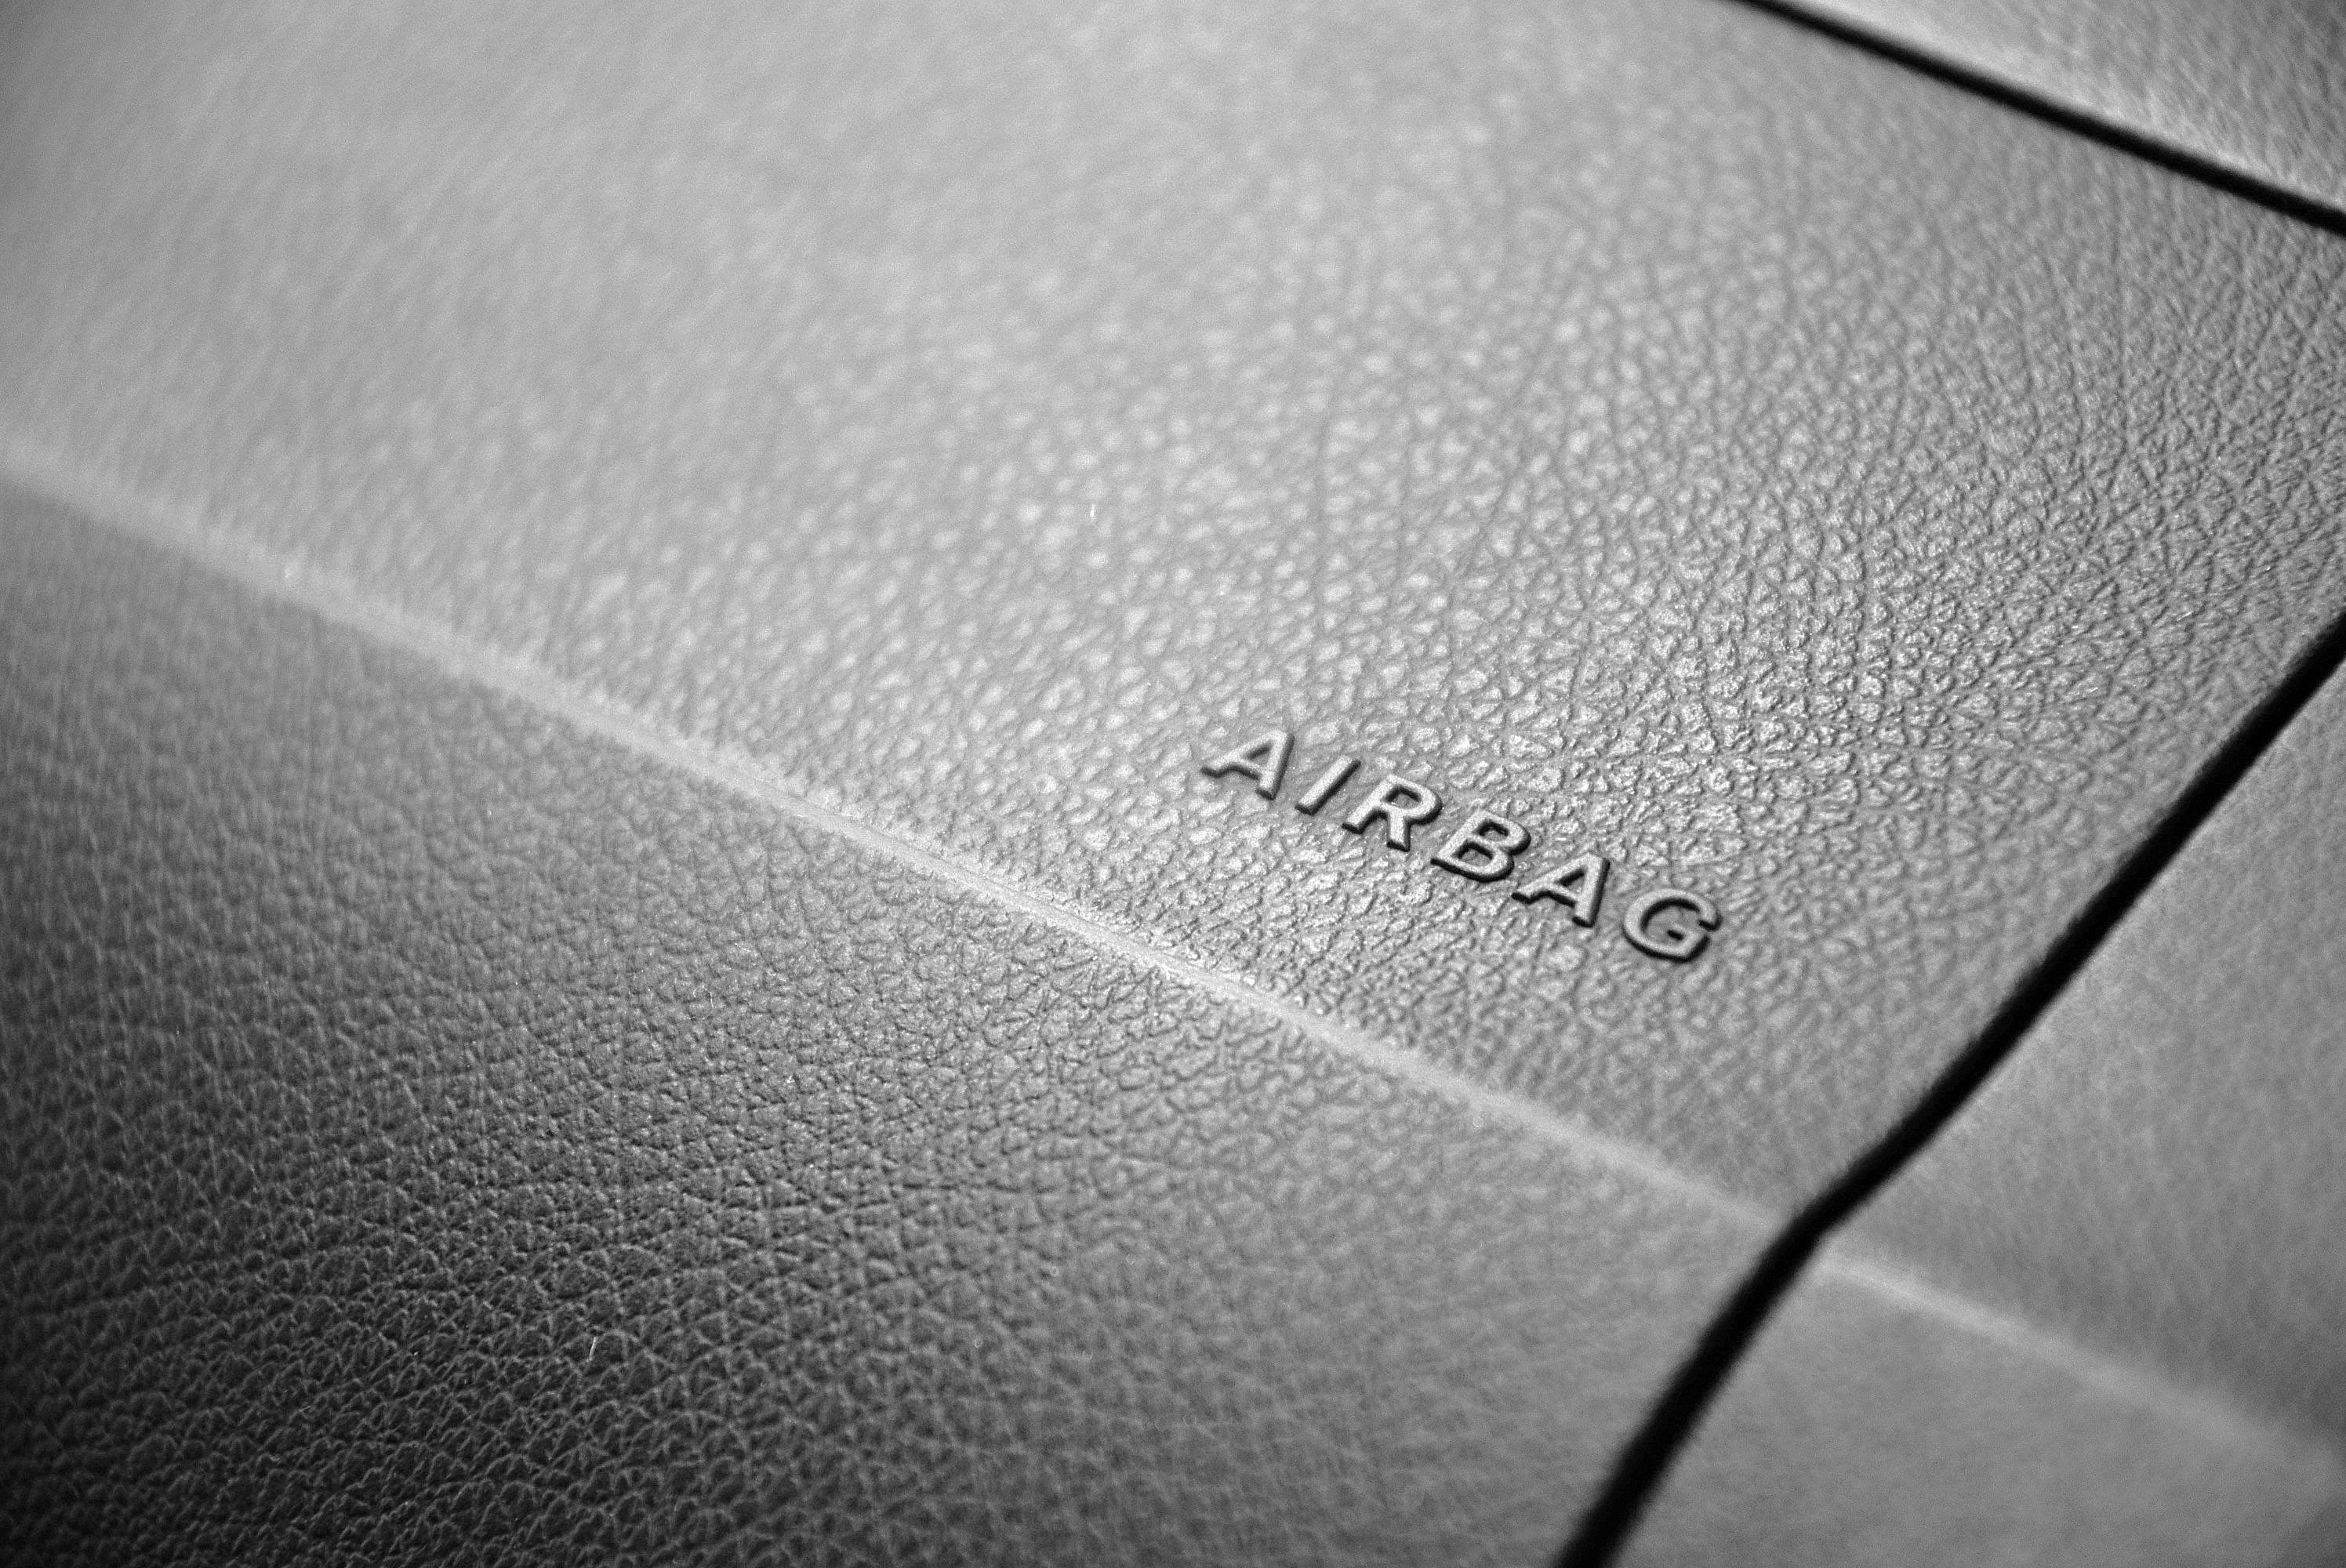 Airbag Photos, Download The BEST Free Airbag Stock Photos & HD Images